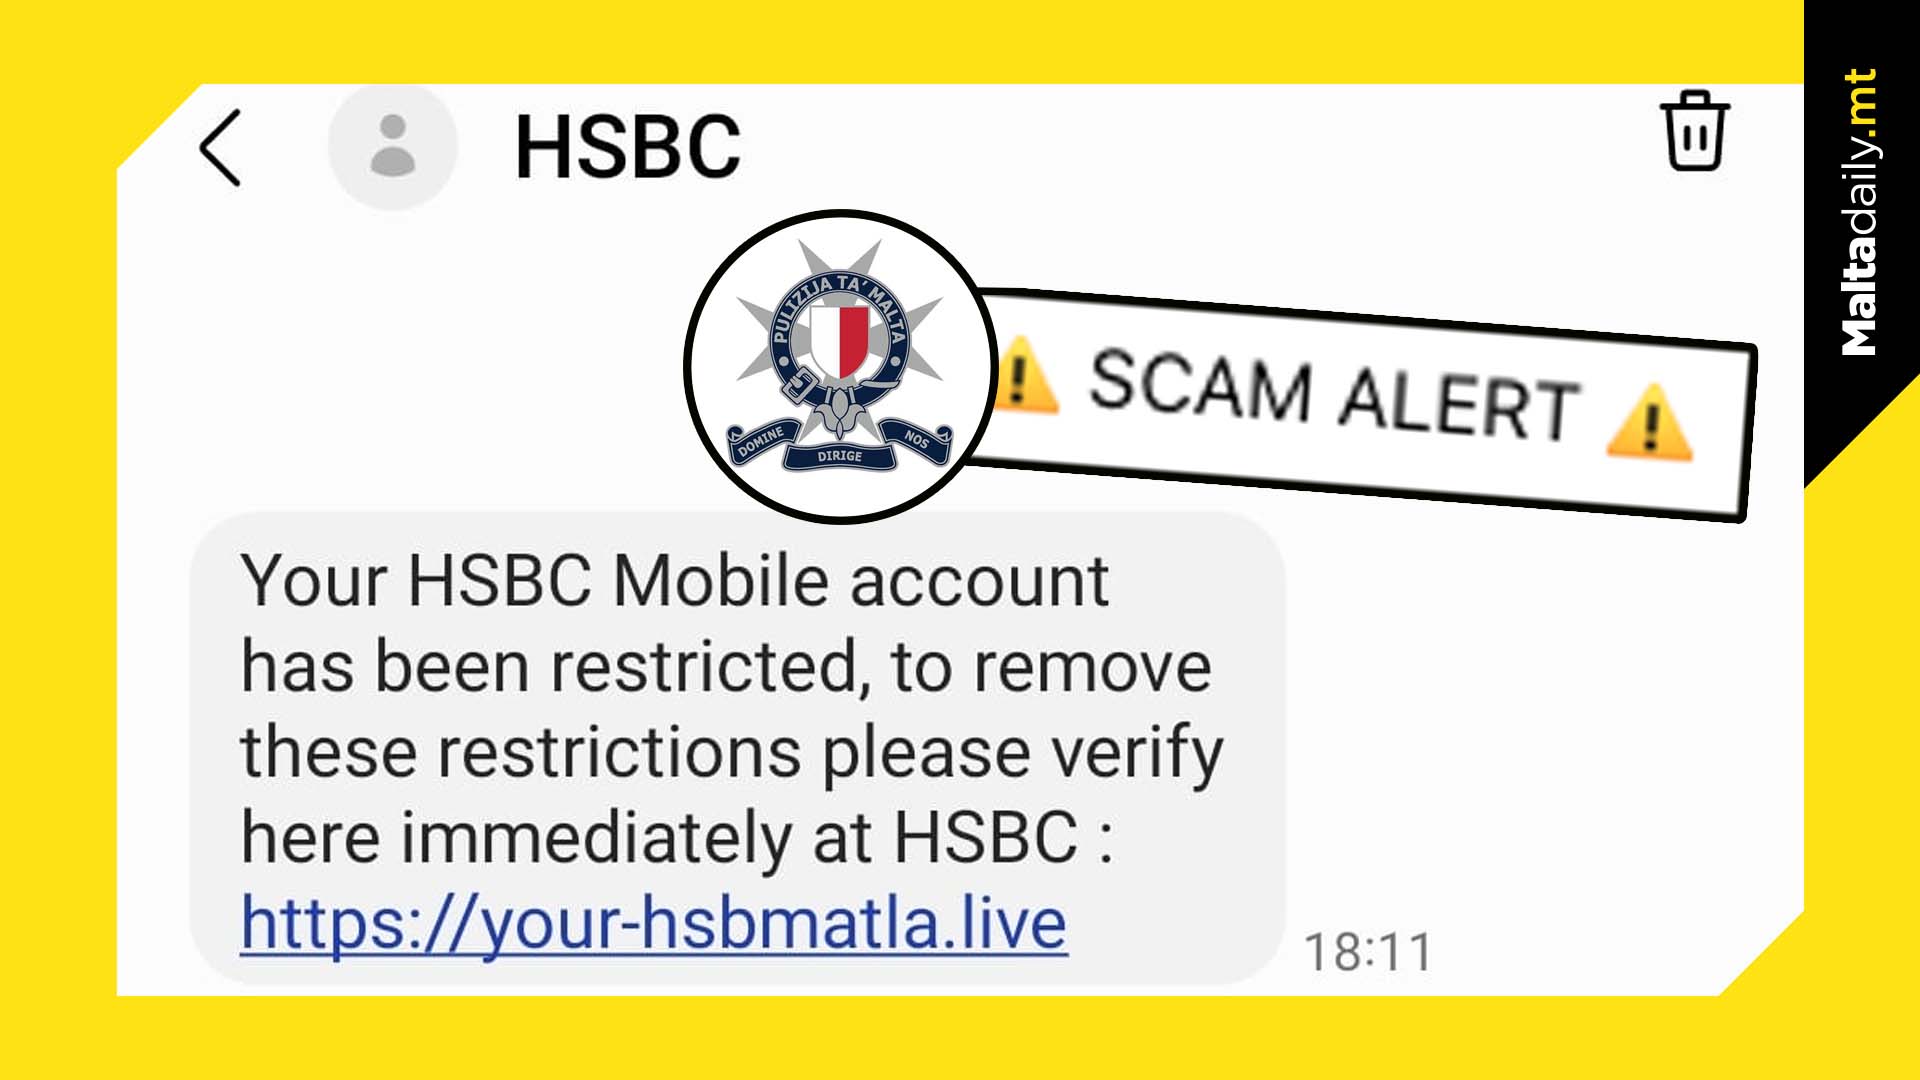 Police issue warning about HSBC bank scam message